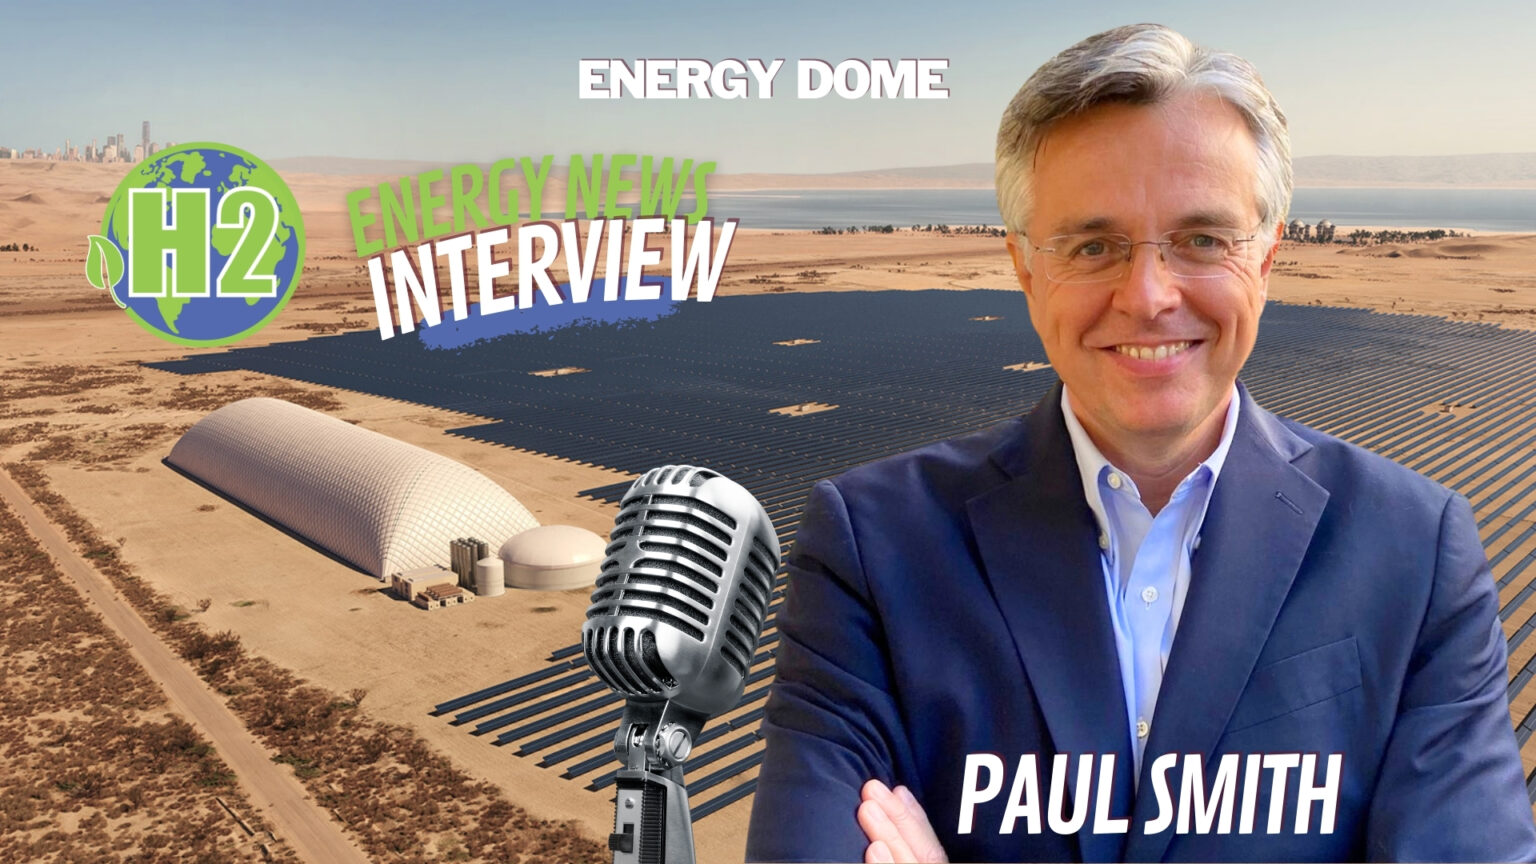 Energy Storage Tech That Enables Hydrogen, Interview with Paul Smith, Energy Dome